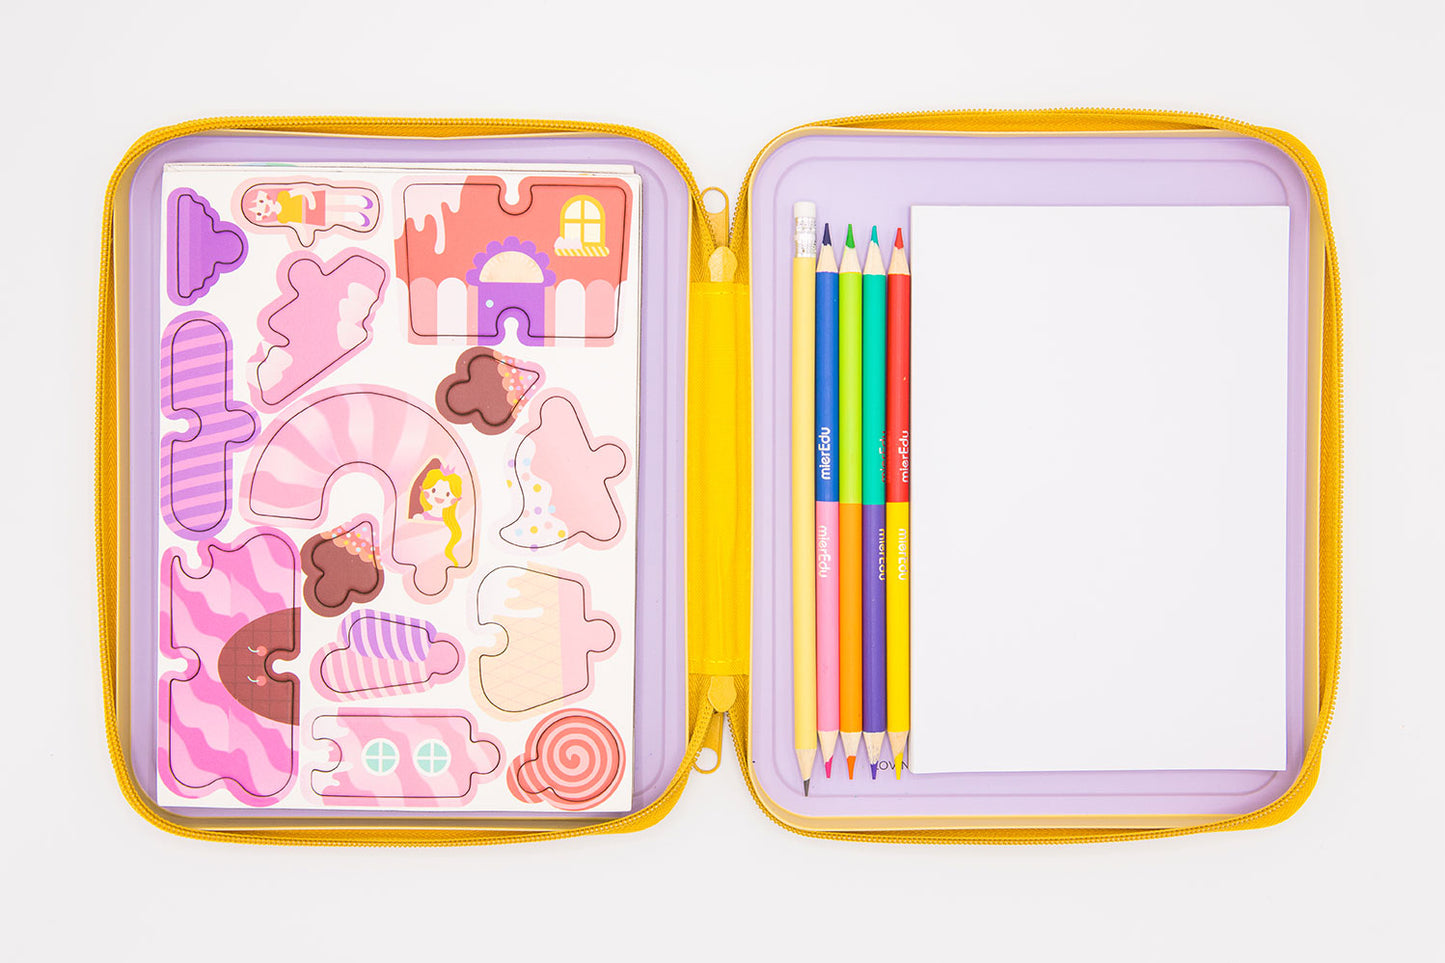 PUZZLE + DRAW MAGNETIC KIT - Candy House